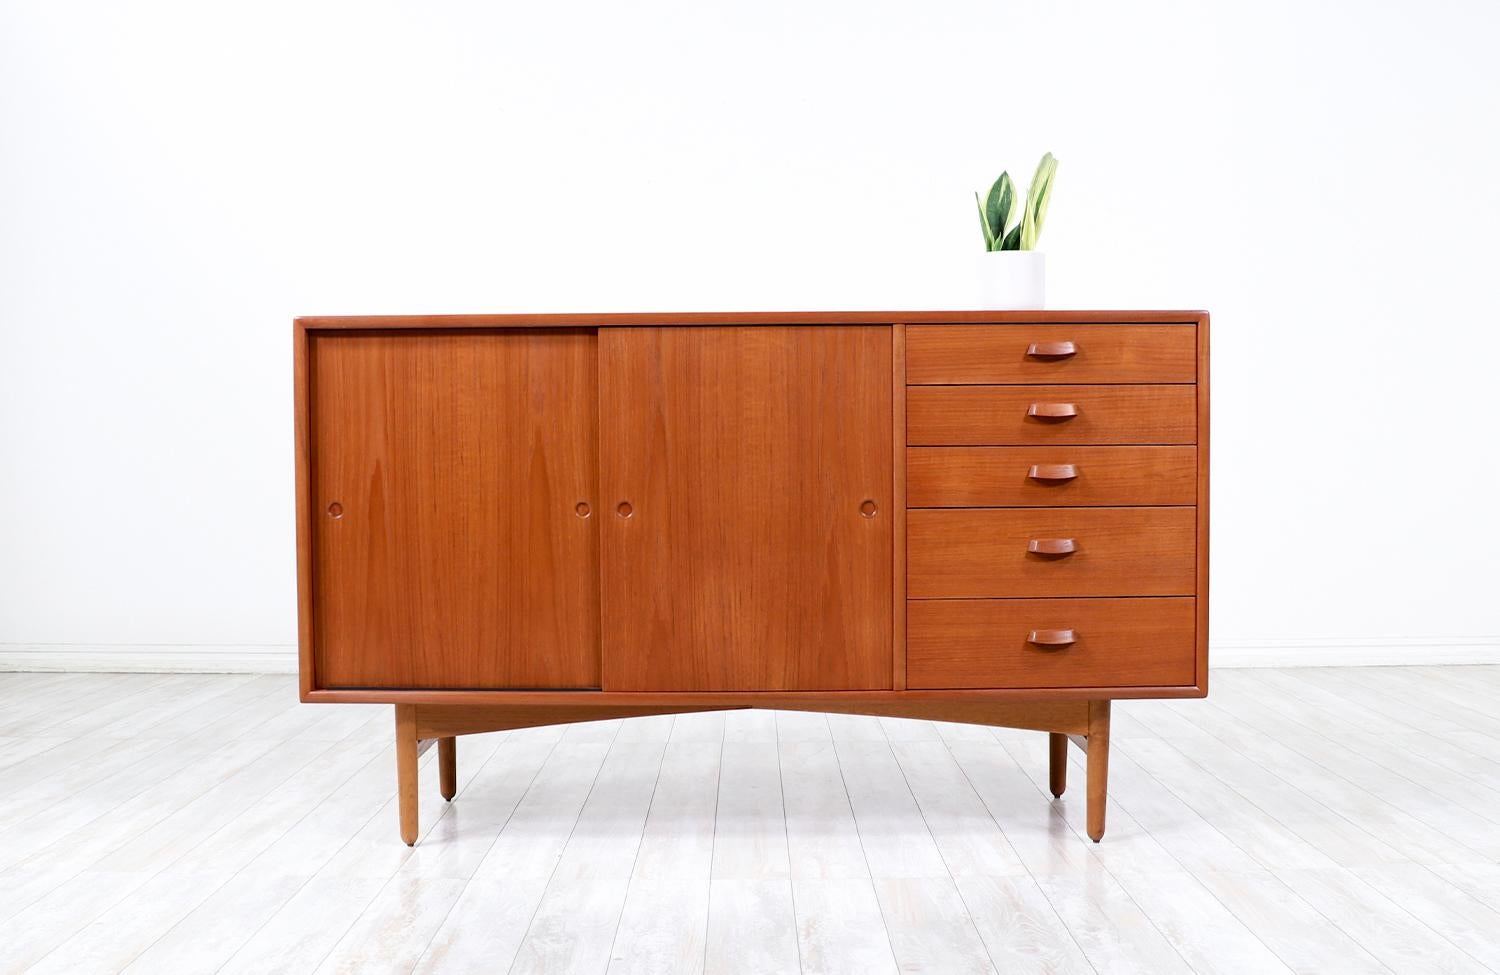 Designer: Svend Age Hansen
Manufacturer: Naestved Møbelfabrik

Transforming a piece of Mid-Century Modern furniture is like bringing history back to life, and we take this journey with passion and precision. With over 17 years of artisanal